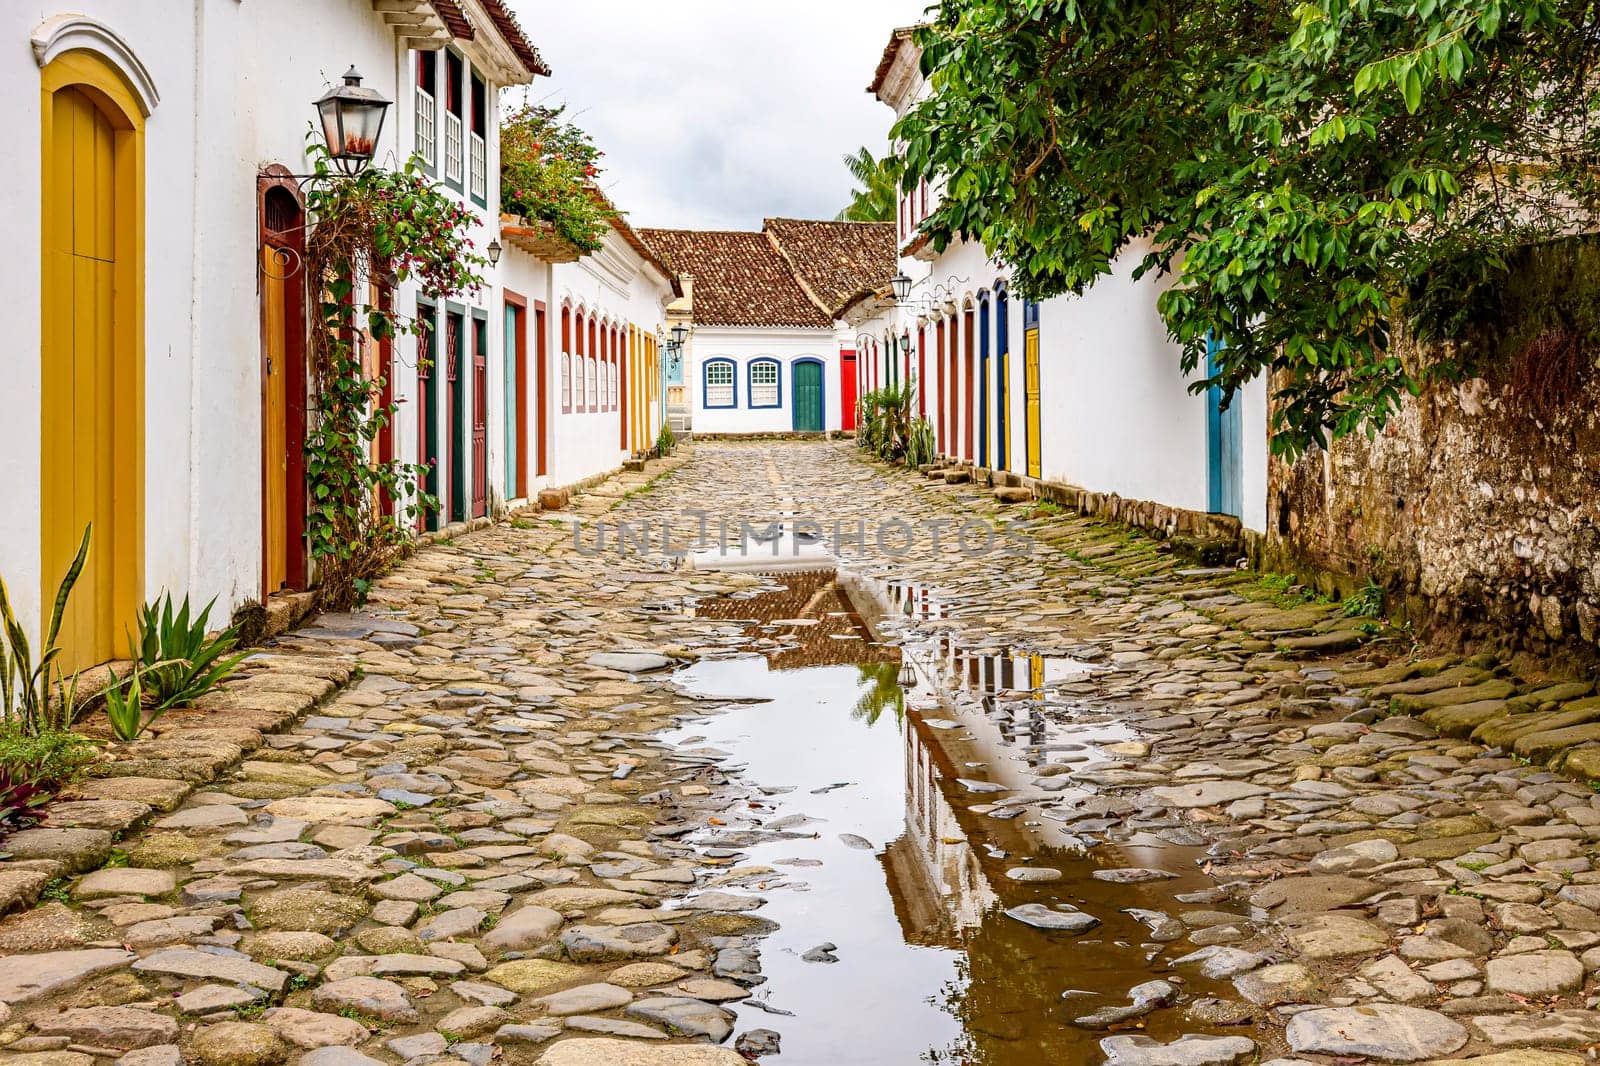 Cobblestone street with colorful colonial houses and reflections in the puddles in the historic city of Paraty, Rio de Janeiro, Brazil